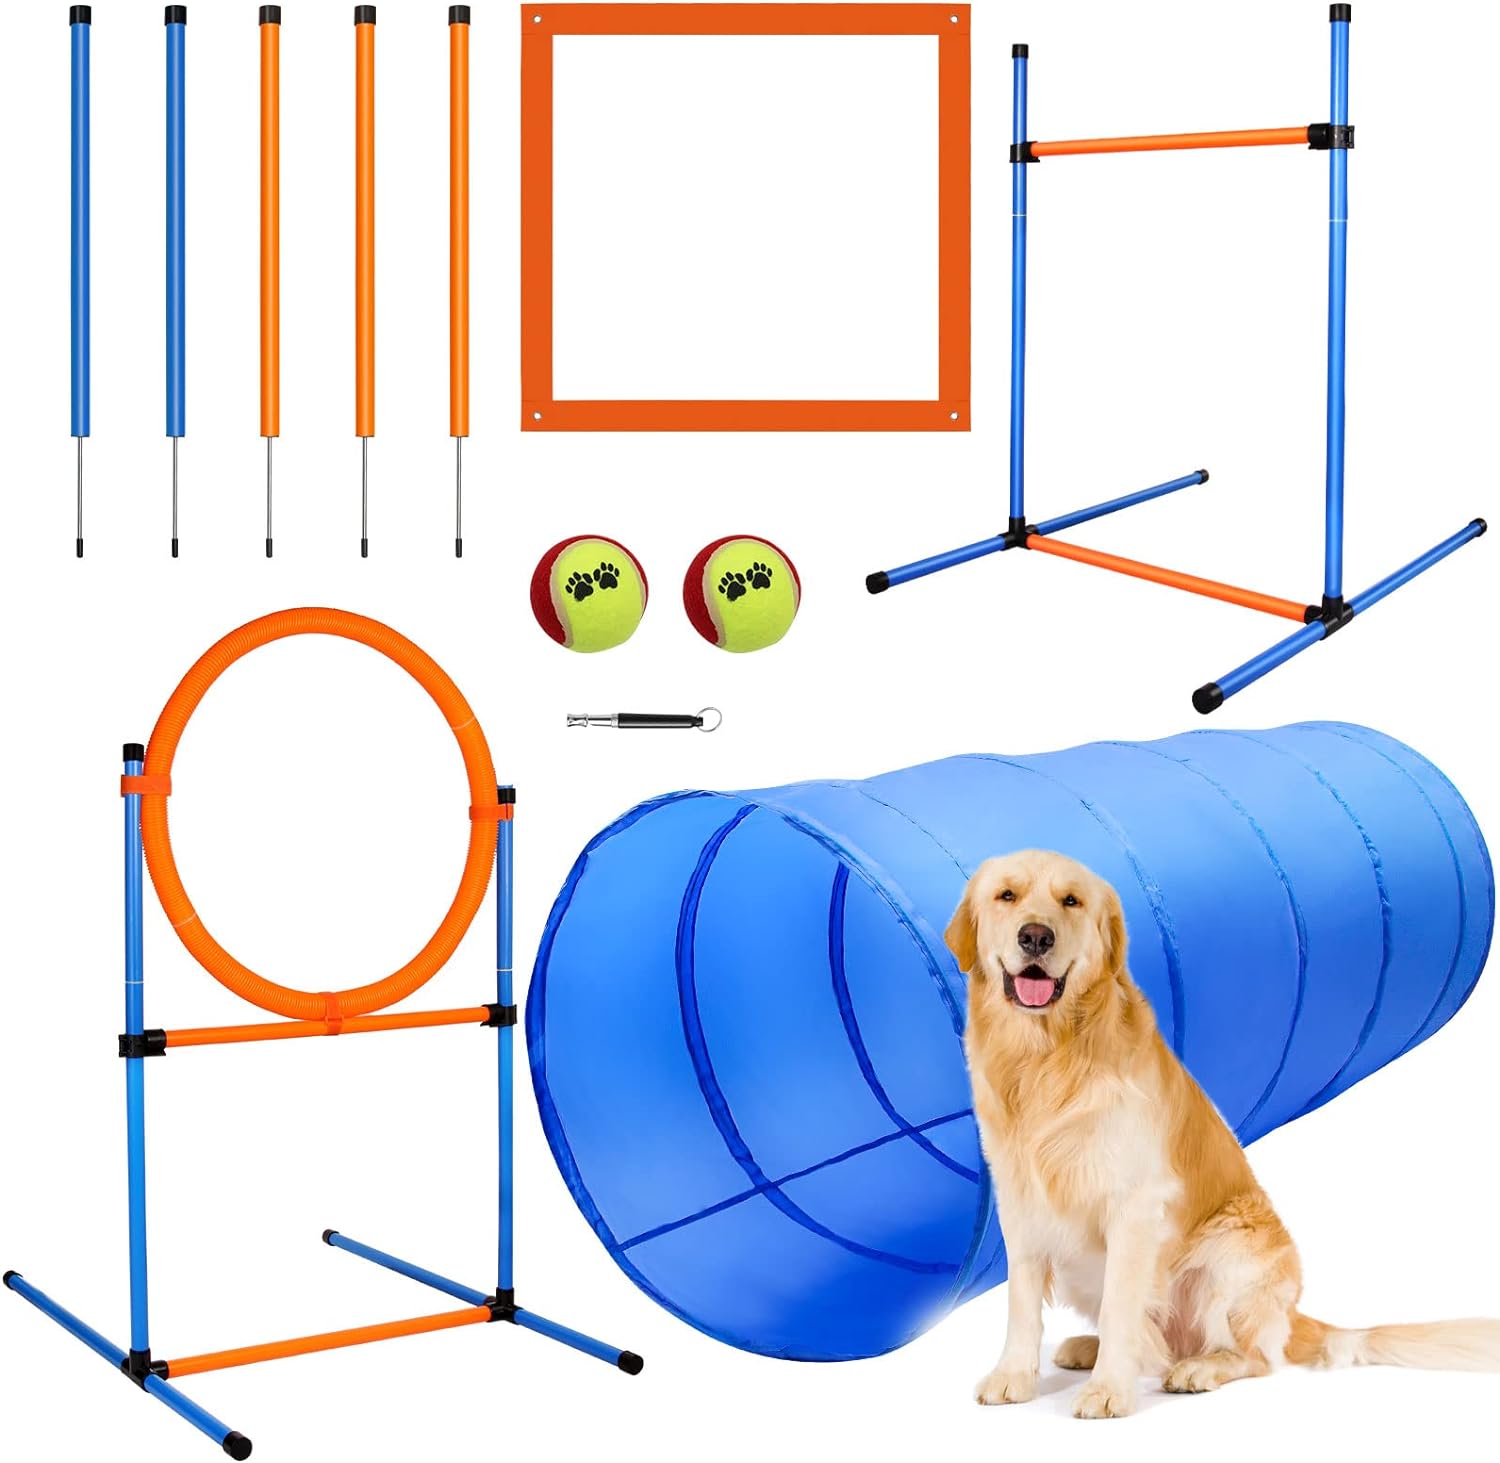 Jmmpoo Dog Agility Training Equipment 60 Piece Obstacle Course Starter Kit Pet Outdoor Games With Tunnel 5 Weave Poles Adjule Hurdle Jump Ring Pause Box Toys And